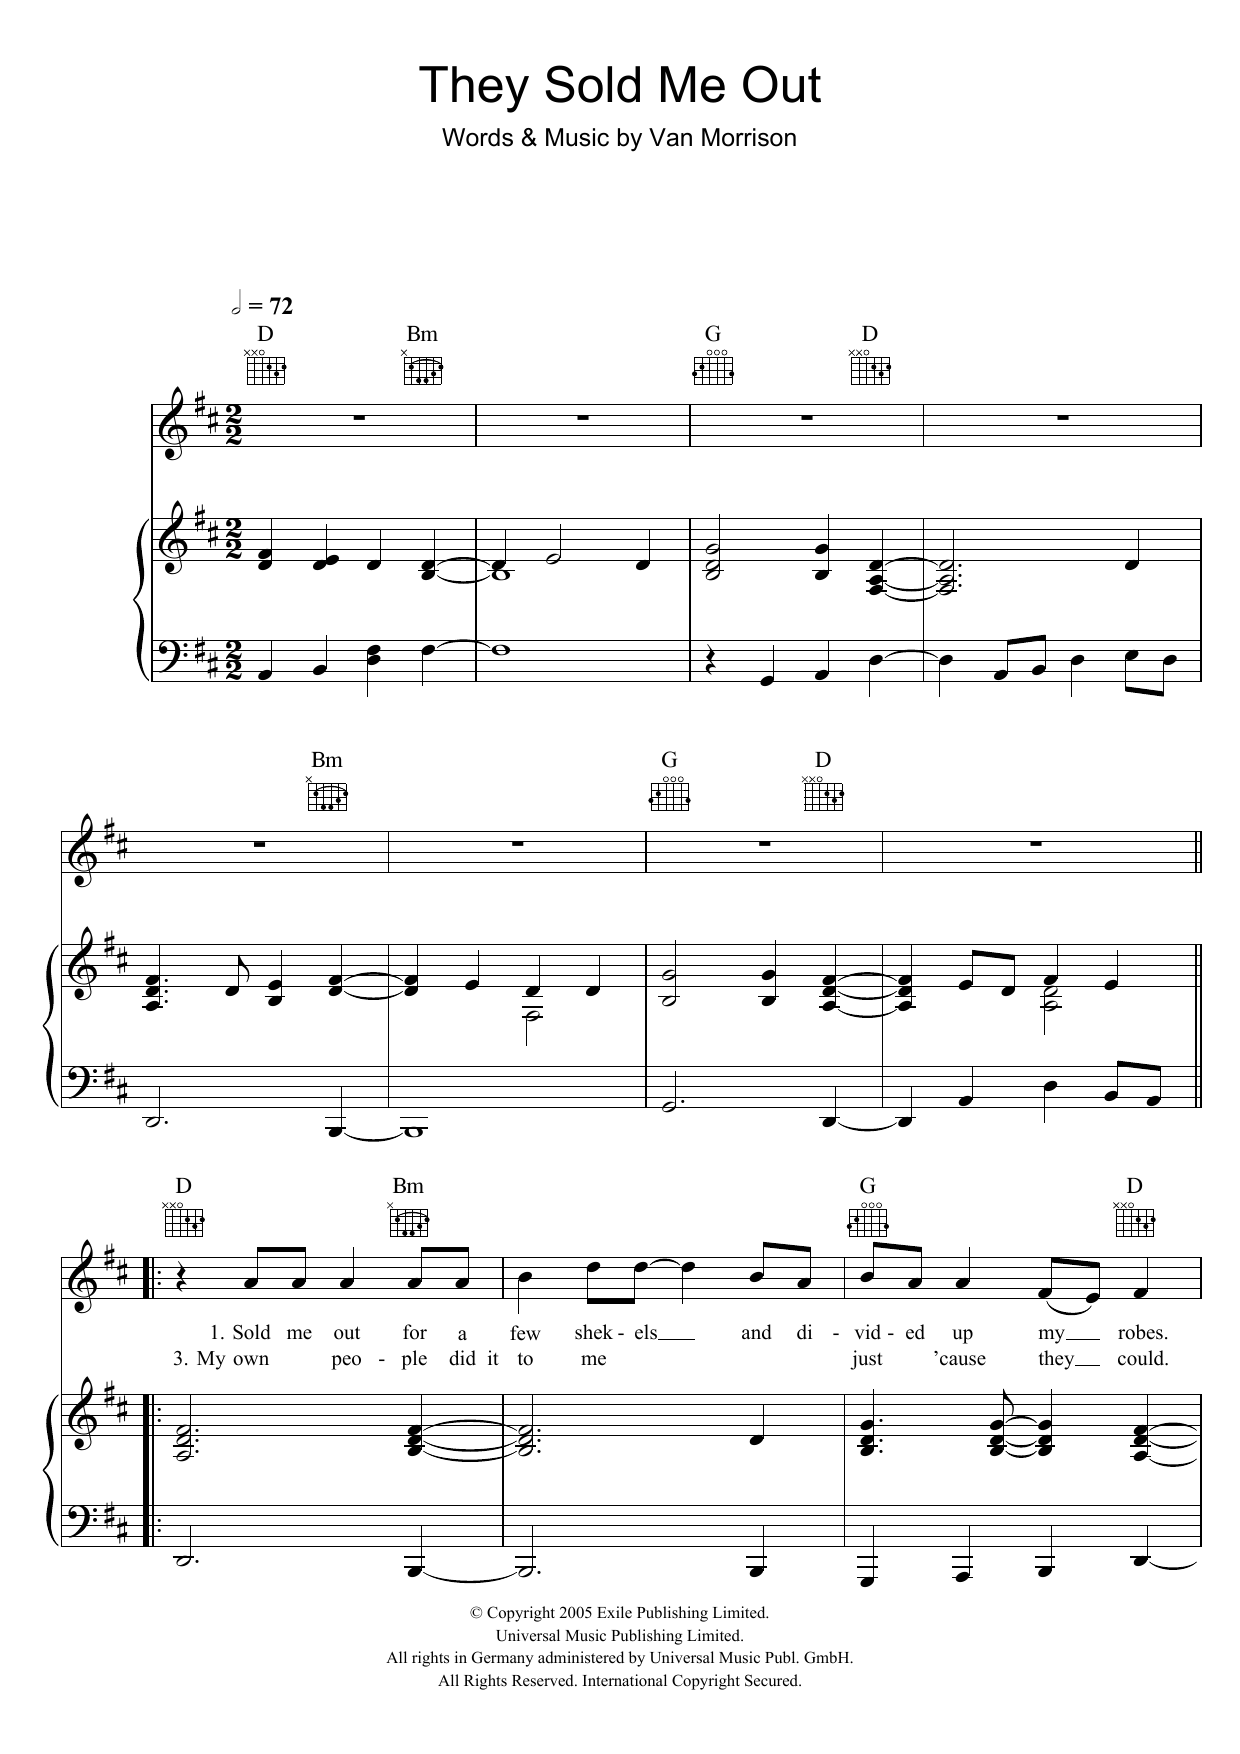 Download Van Morrison They Sold Me Out Sheet Music